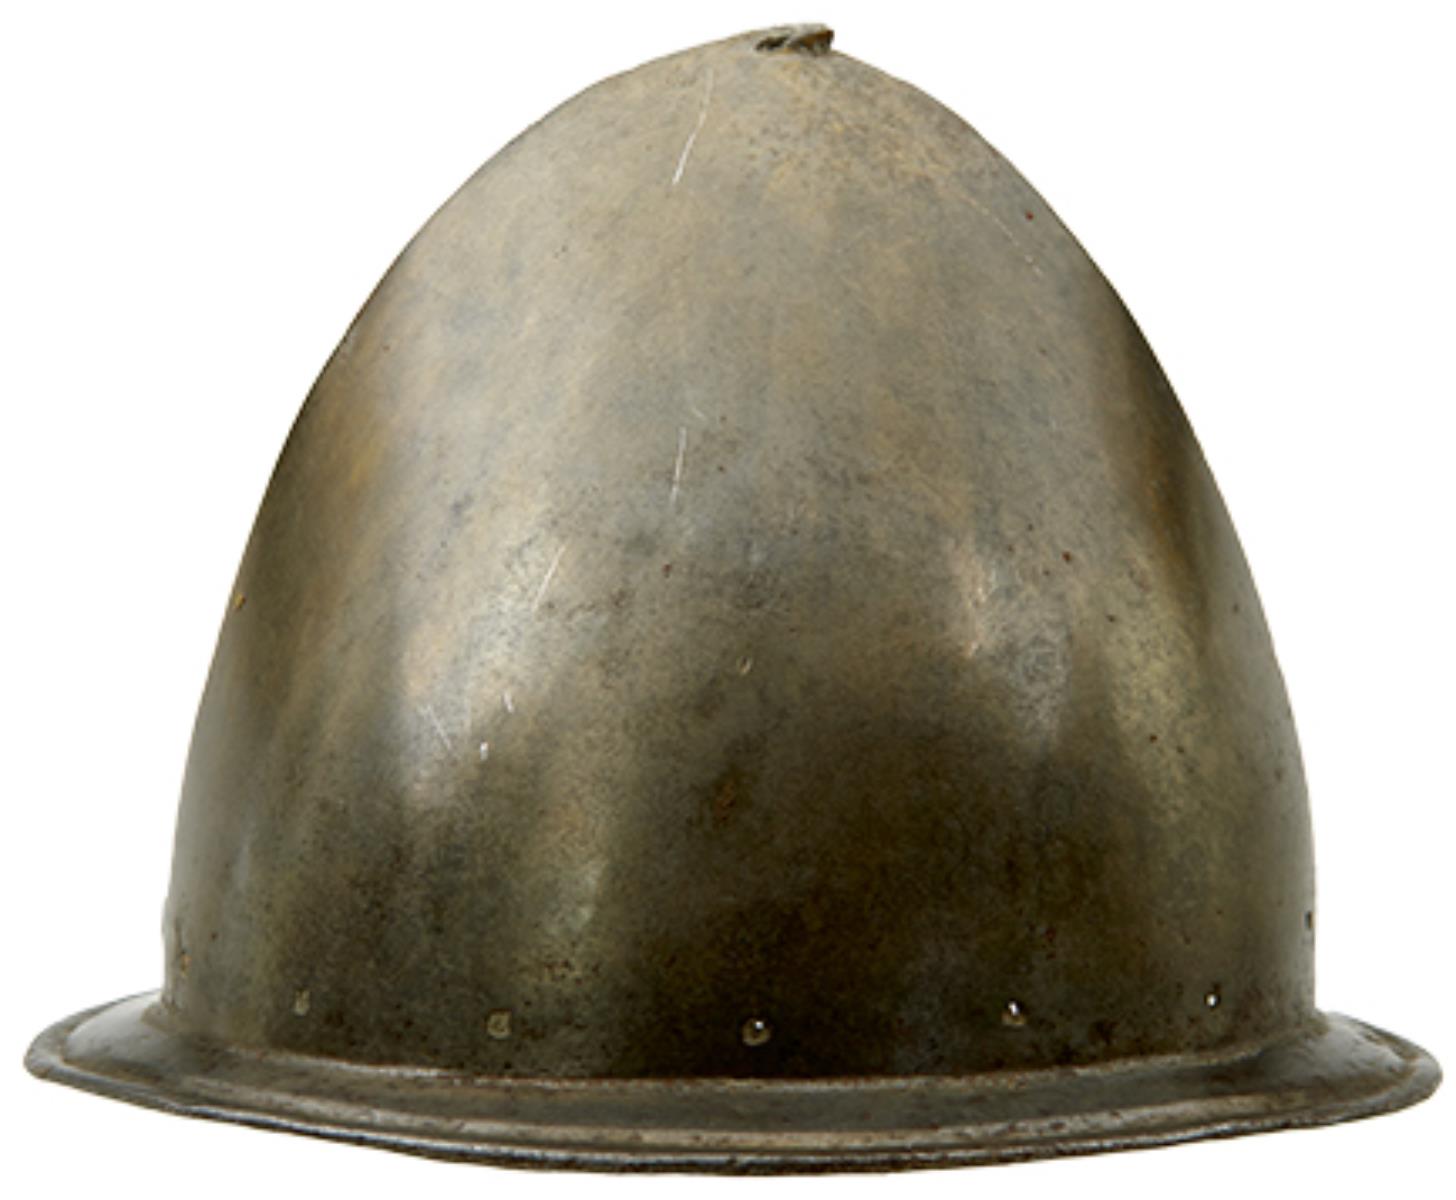 AN ITALIAN CABASET HELMET IN THE SPANISH FASHION, circa 1580, almond-shaped bowl raised from a